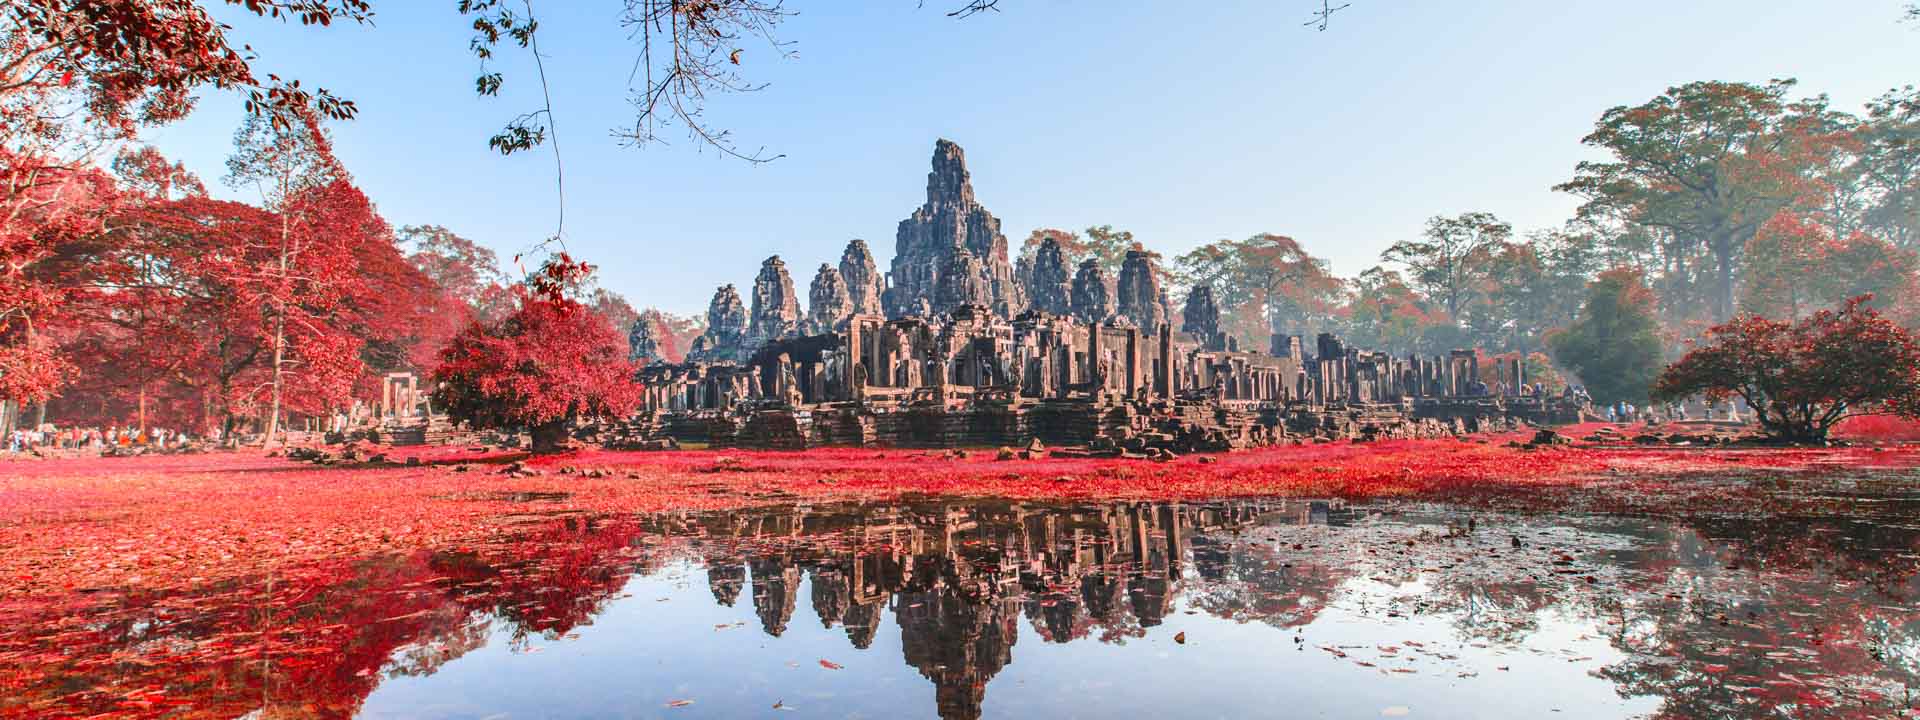 Vietnam Cambodia Tour 2 weeks for family holiday